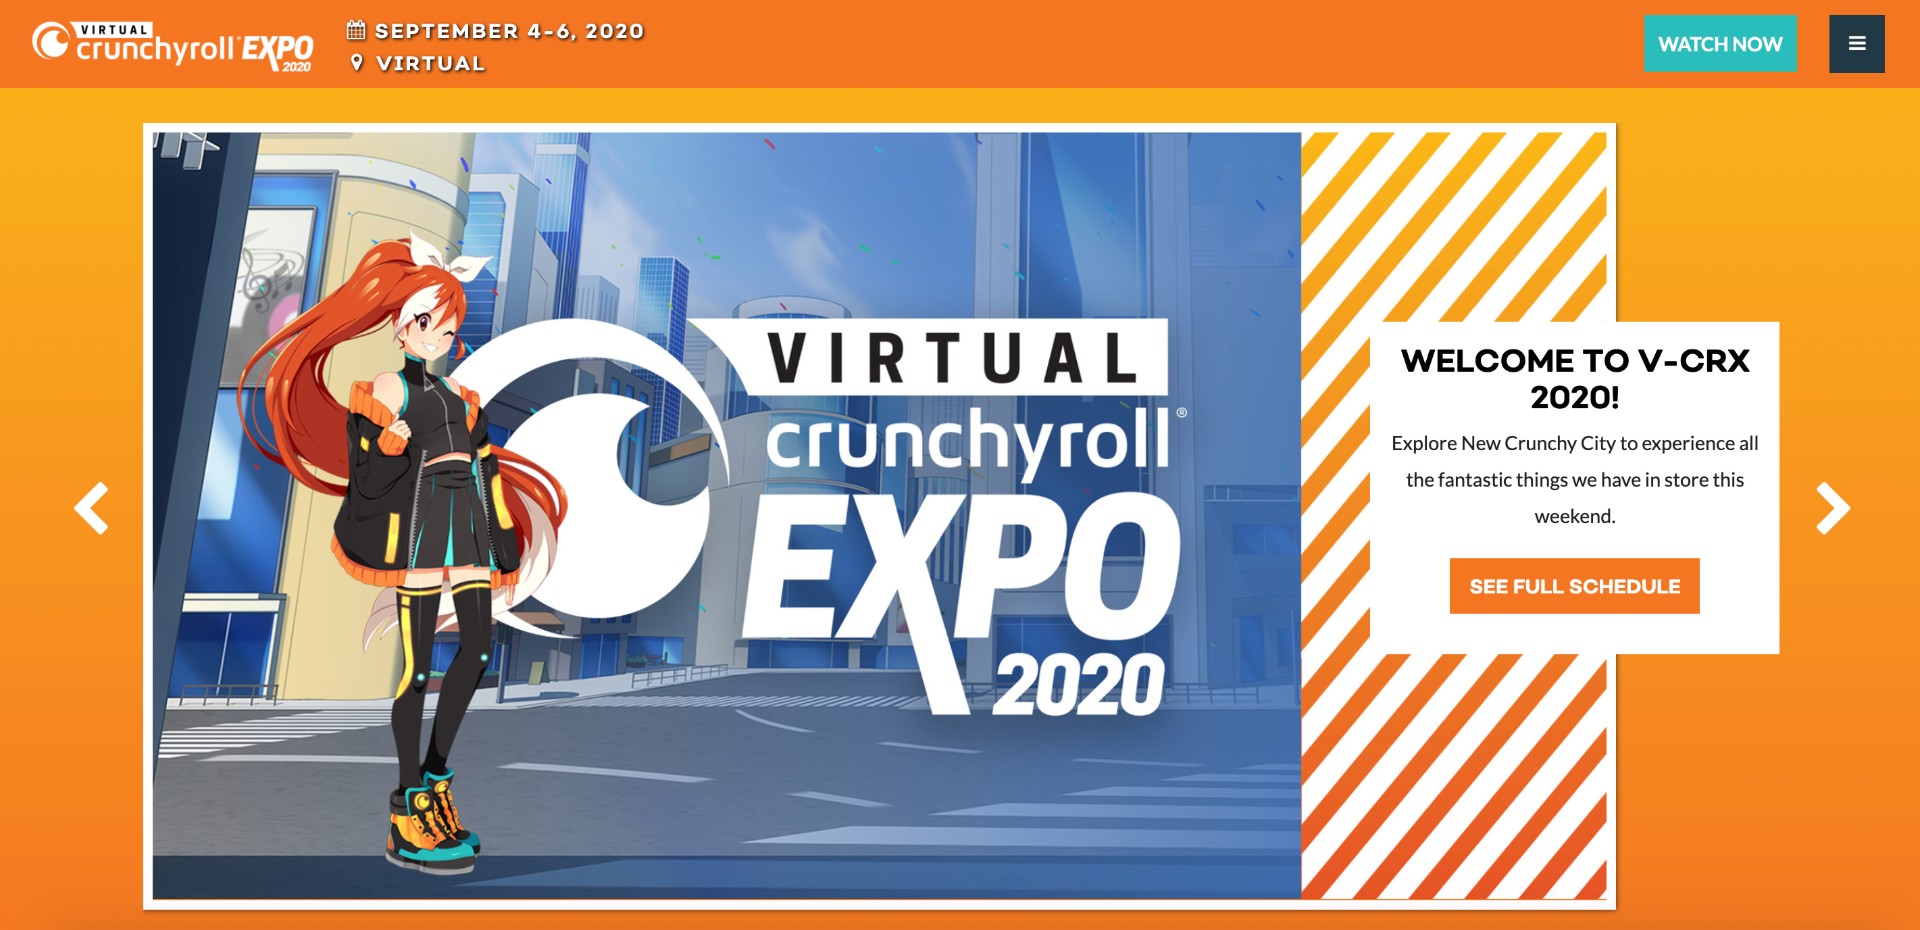 Virtual Crunchyroll Expo Wrapped Up This Weekend with Huge Announcements and More!